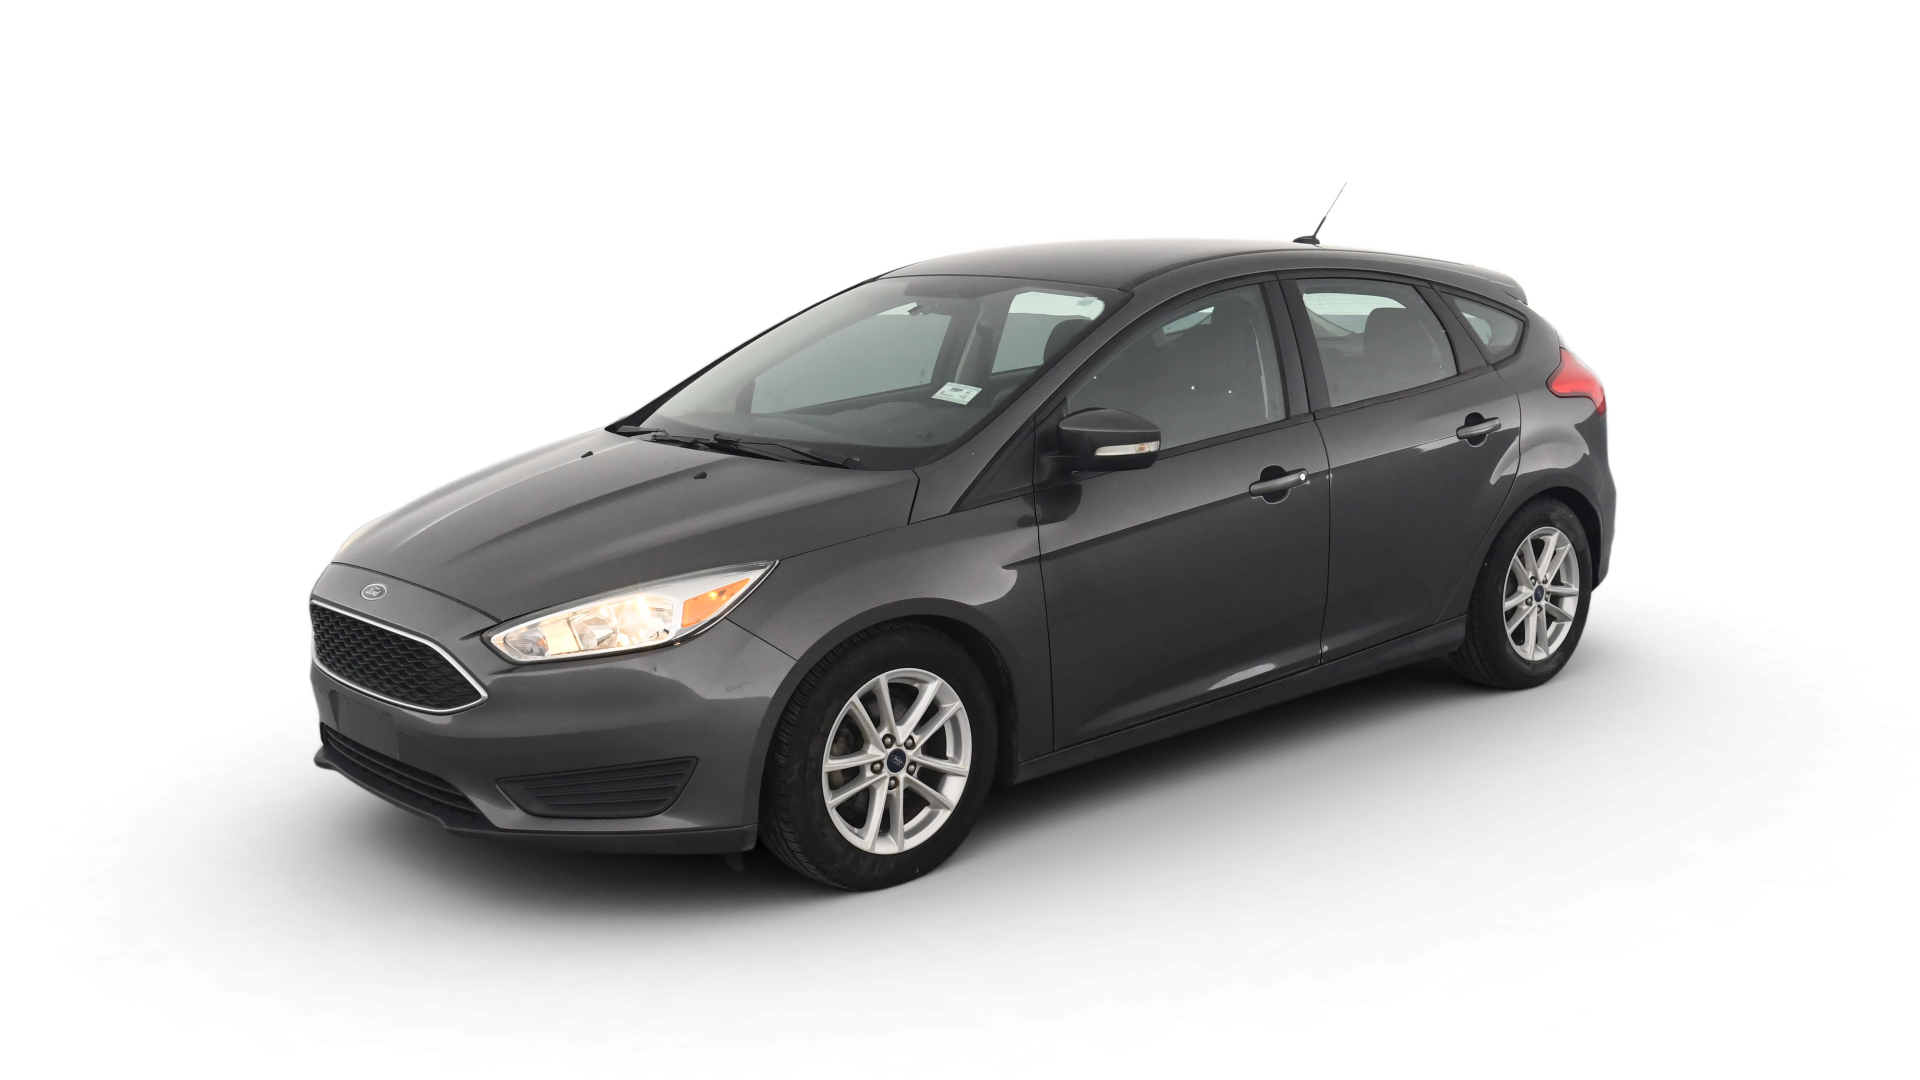 Used Ford Focus for Sale